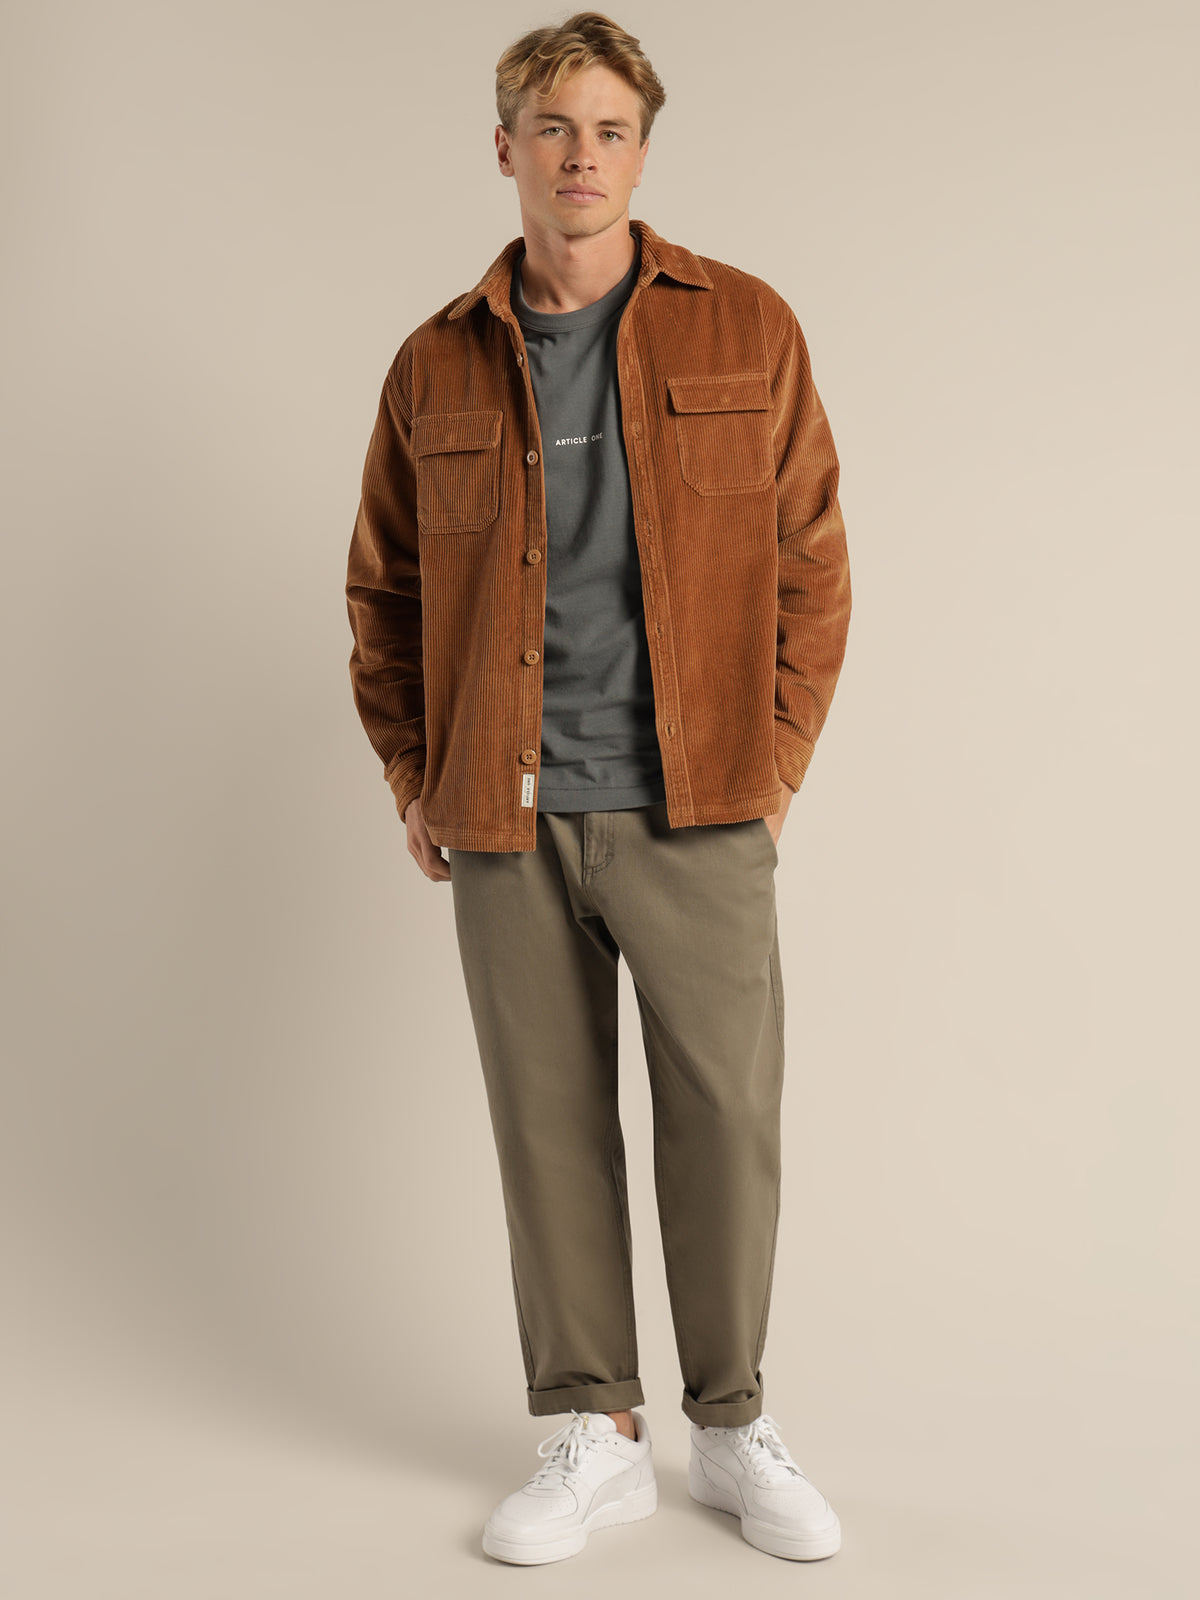 Oakes Cord Overshirt in Saffron